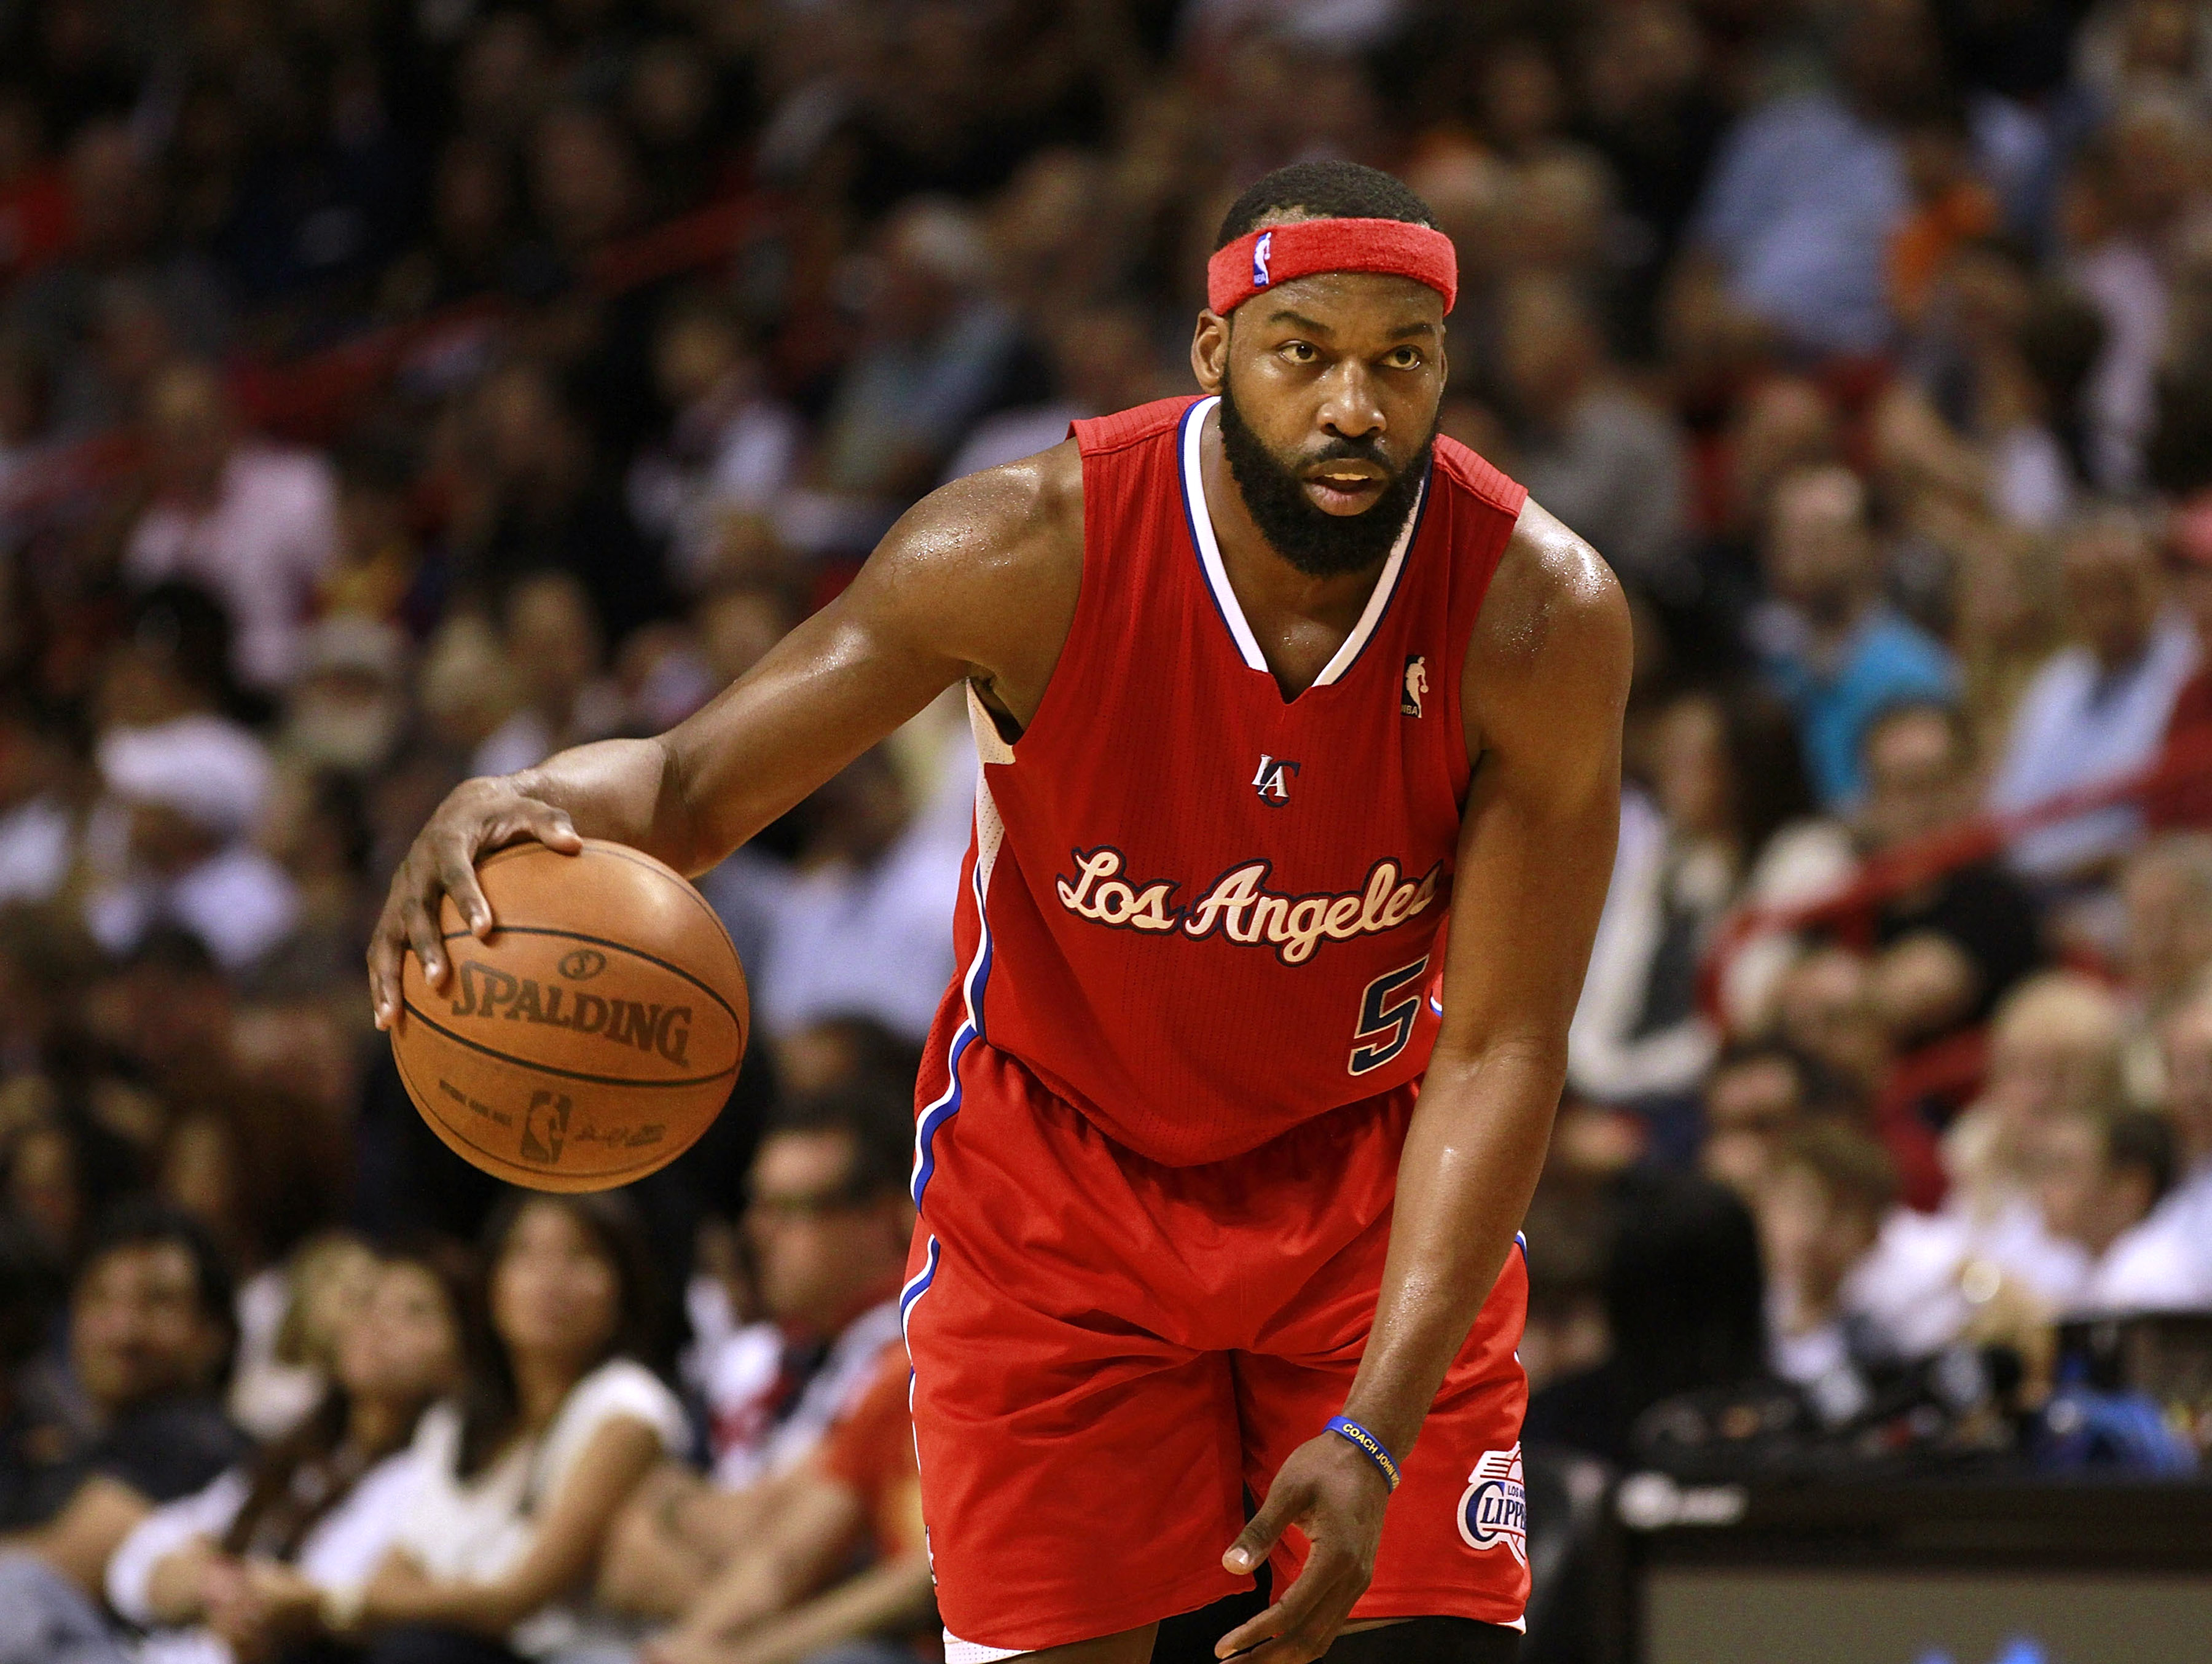 MIAMI, FL - FEBRUARY 06: Guard Baron Davis of the Los Angeles Clippers drives against the Miami Heat at American Airlines Arena on February 6, 2011 in Miami, Florida. The Heat defeated the Clippers 97-79. NOTE TO USER: User expressly acknowledges and agre